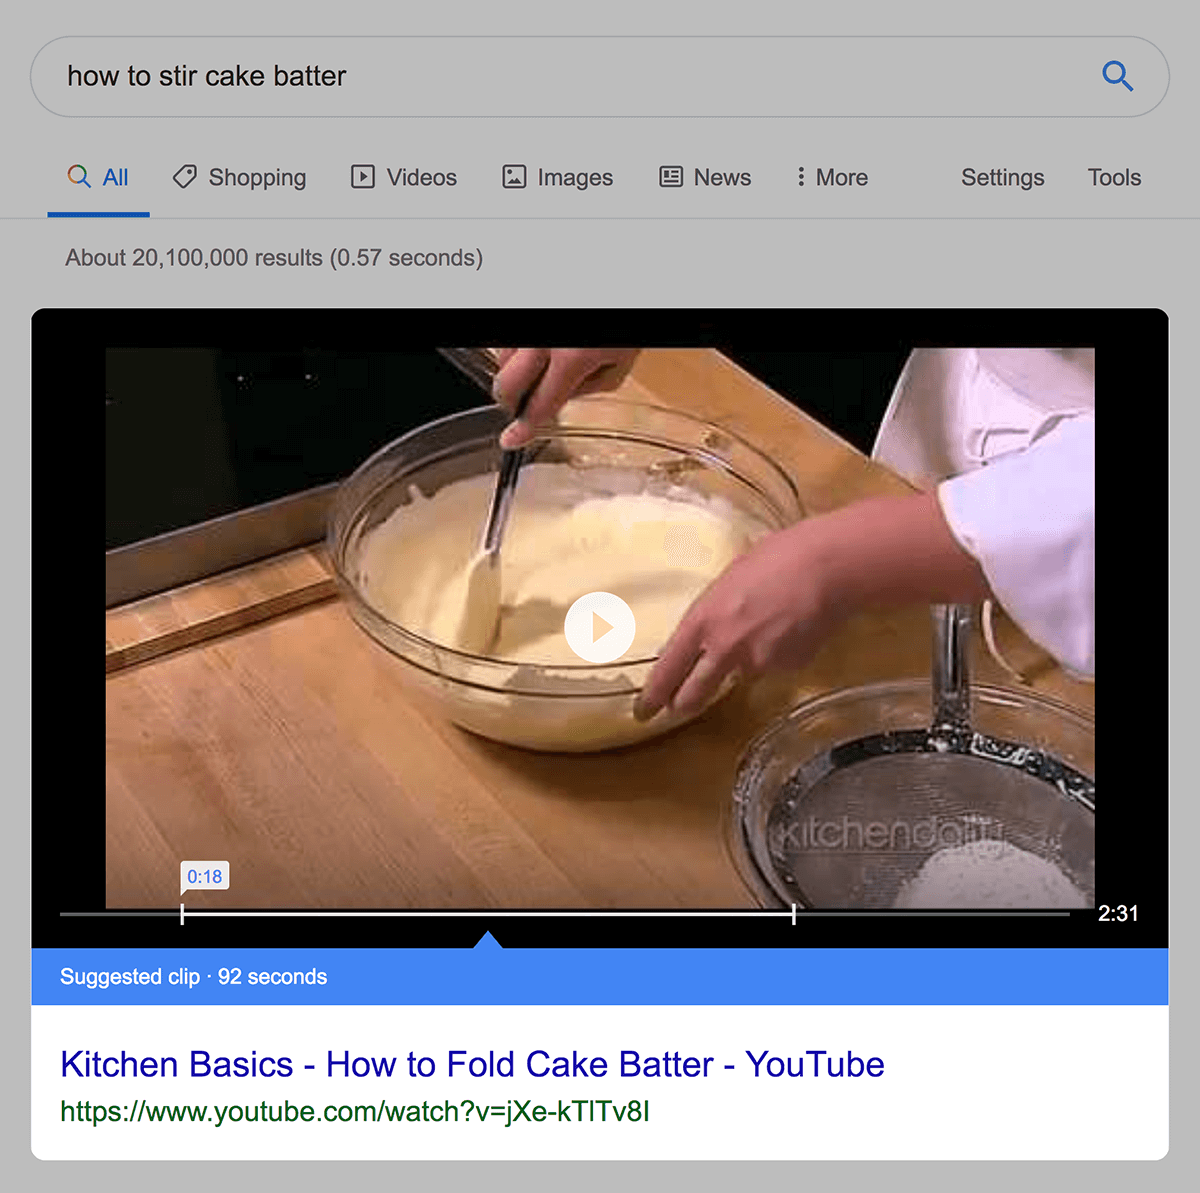 featured snippet with video